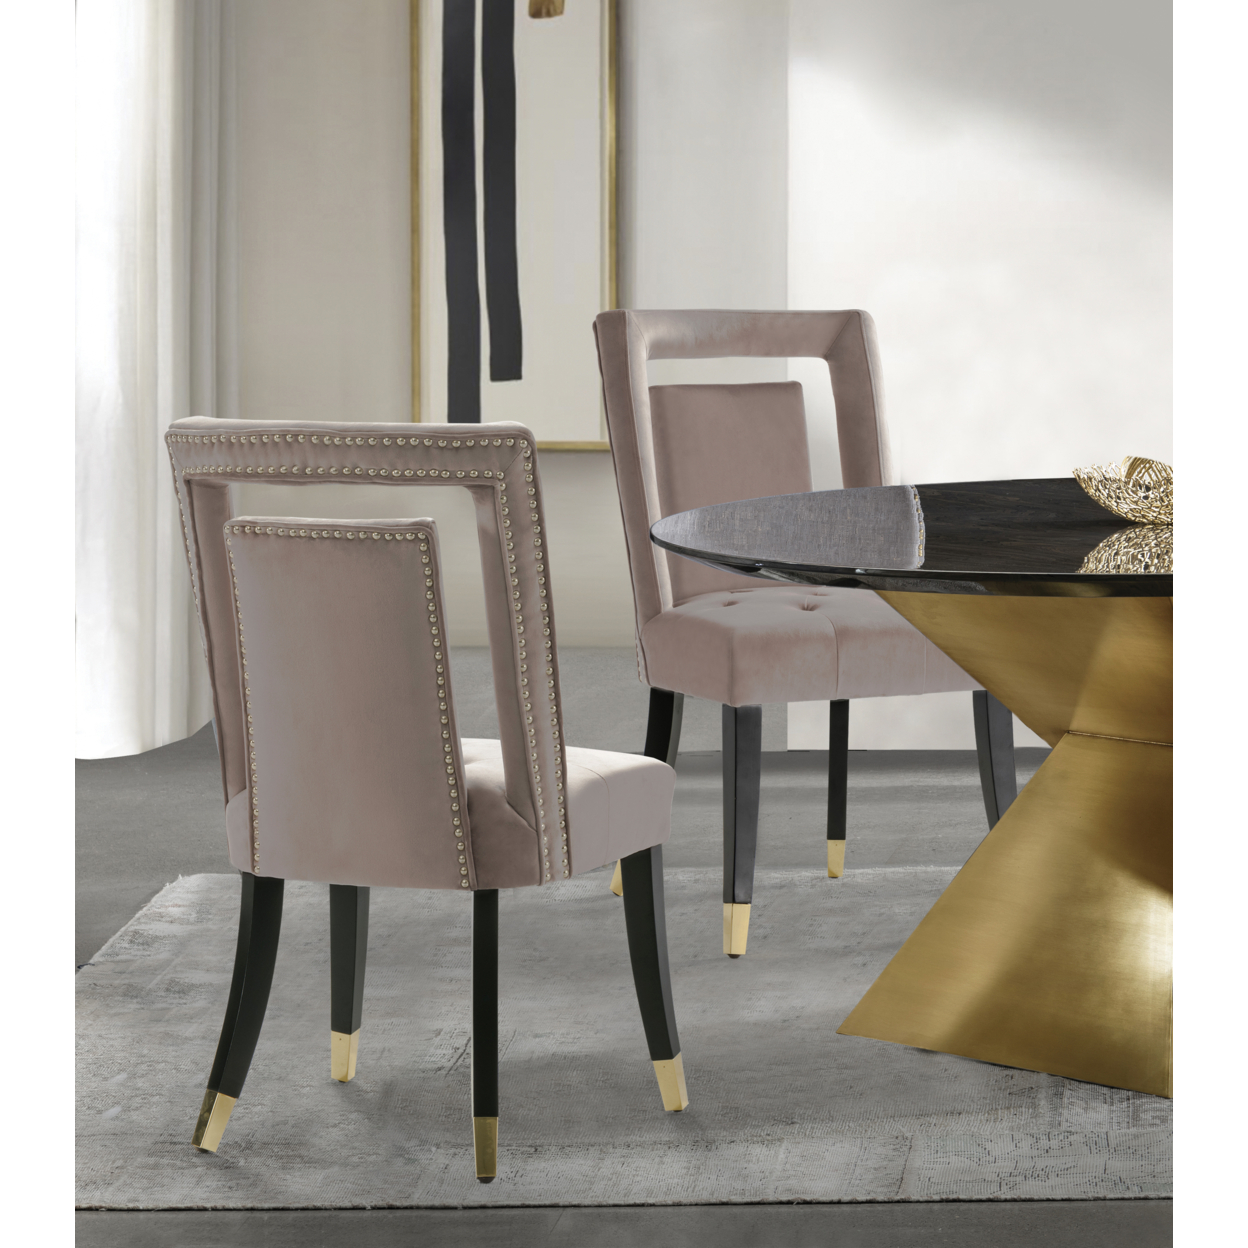 Iconic Home Elsa Dining Side Chair Velvet Upholstered Nailhead Trim Seat Espresso Finished Gold Tip Tapered Wood Legs, Set Of 2 - Blush